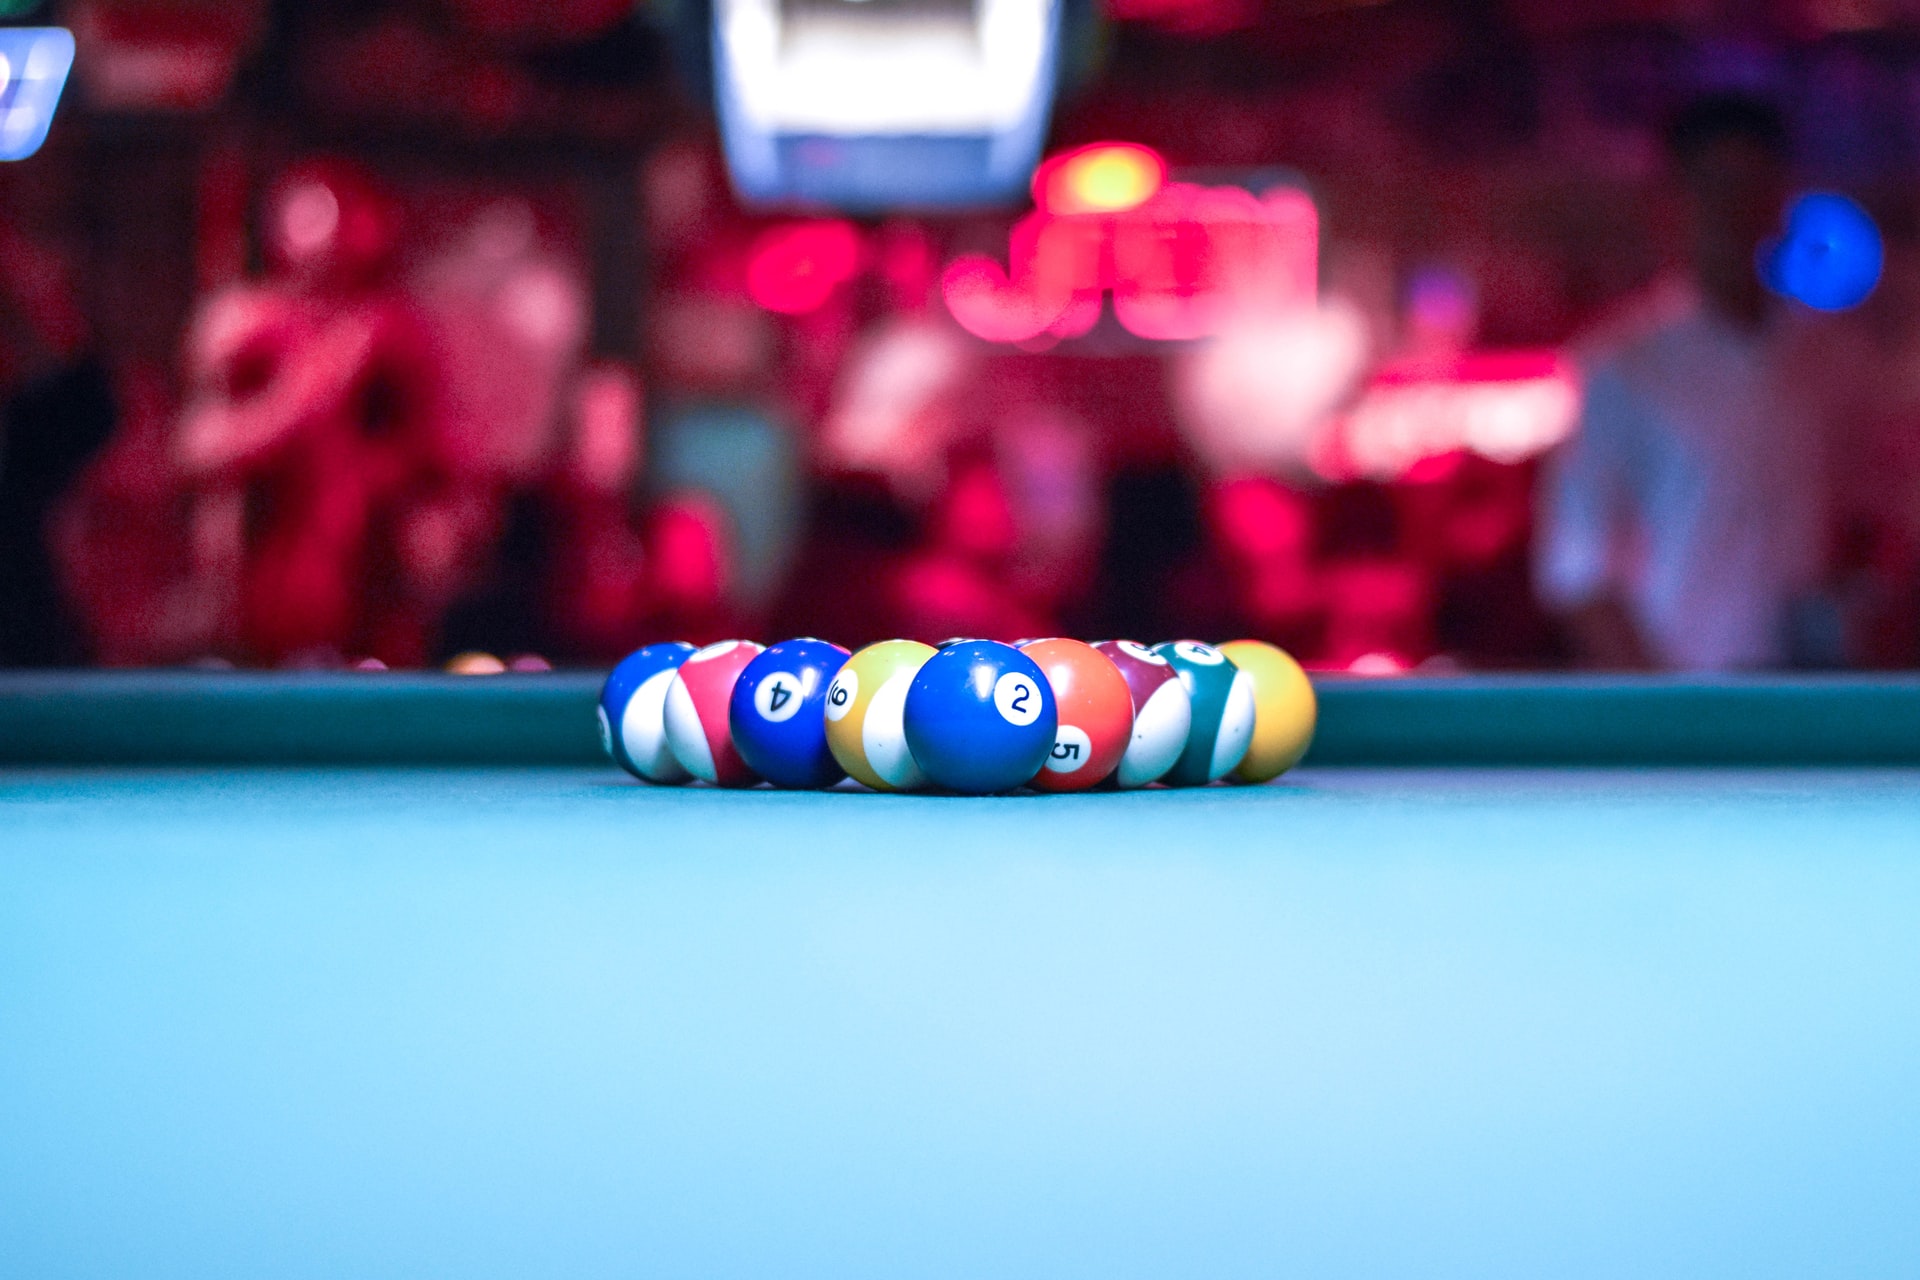 What is a good pool table for home use?